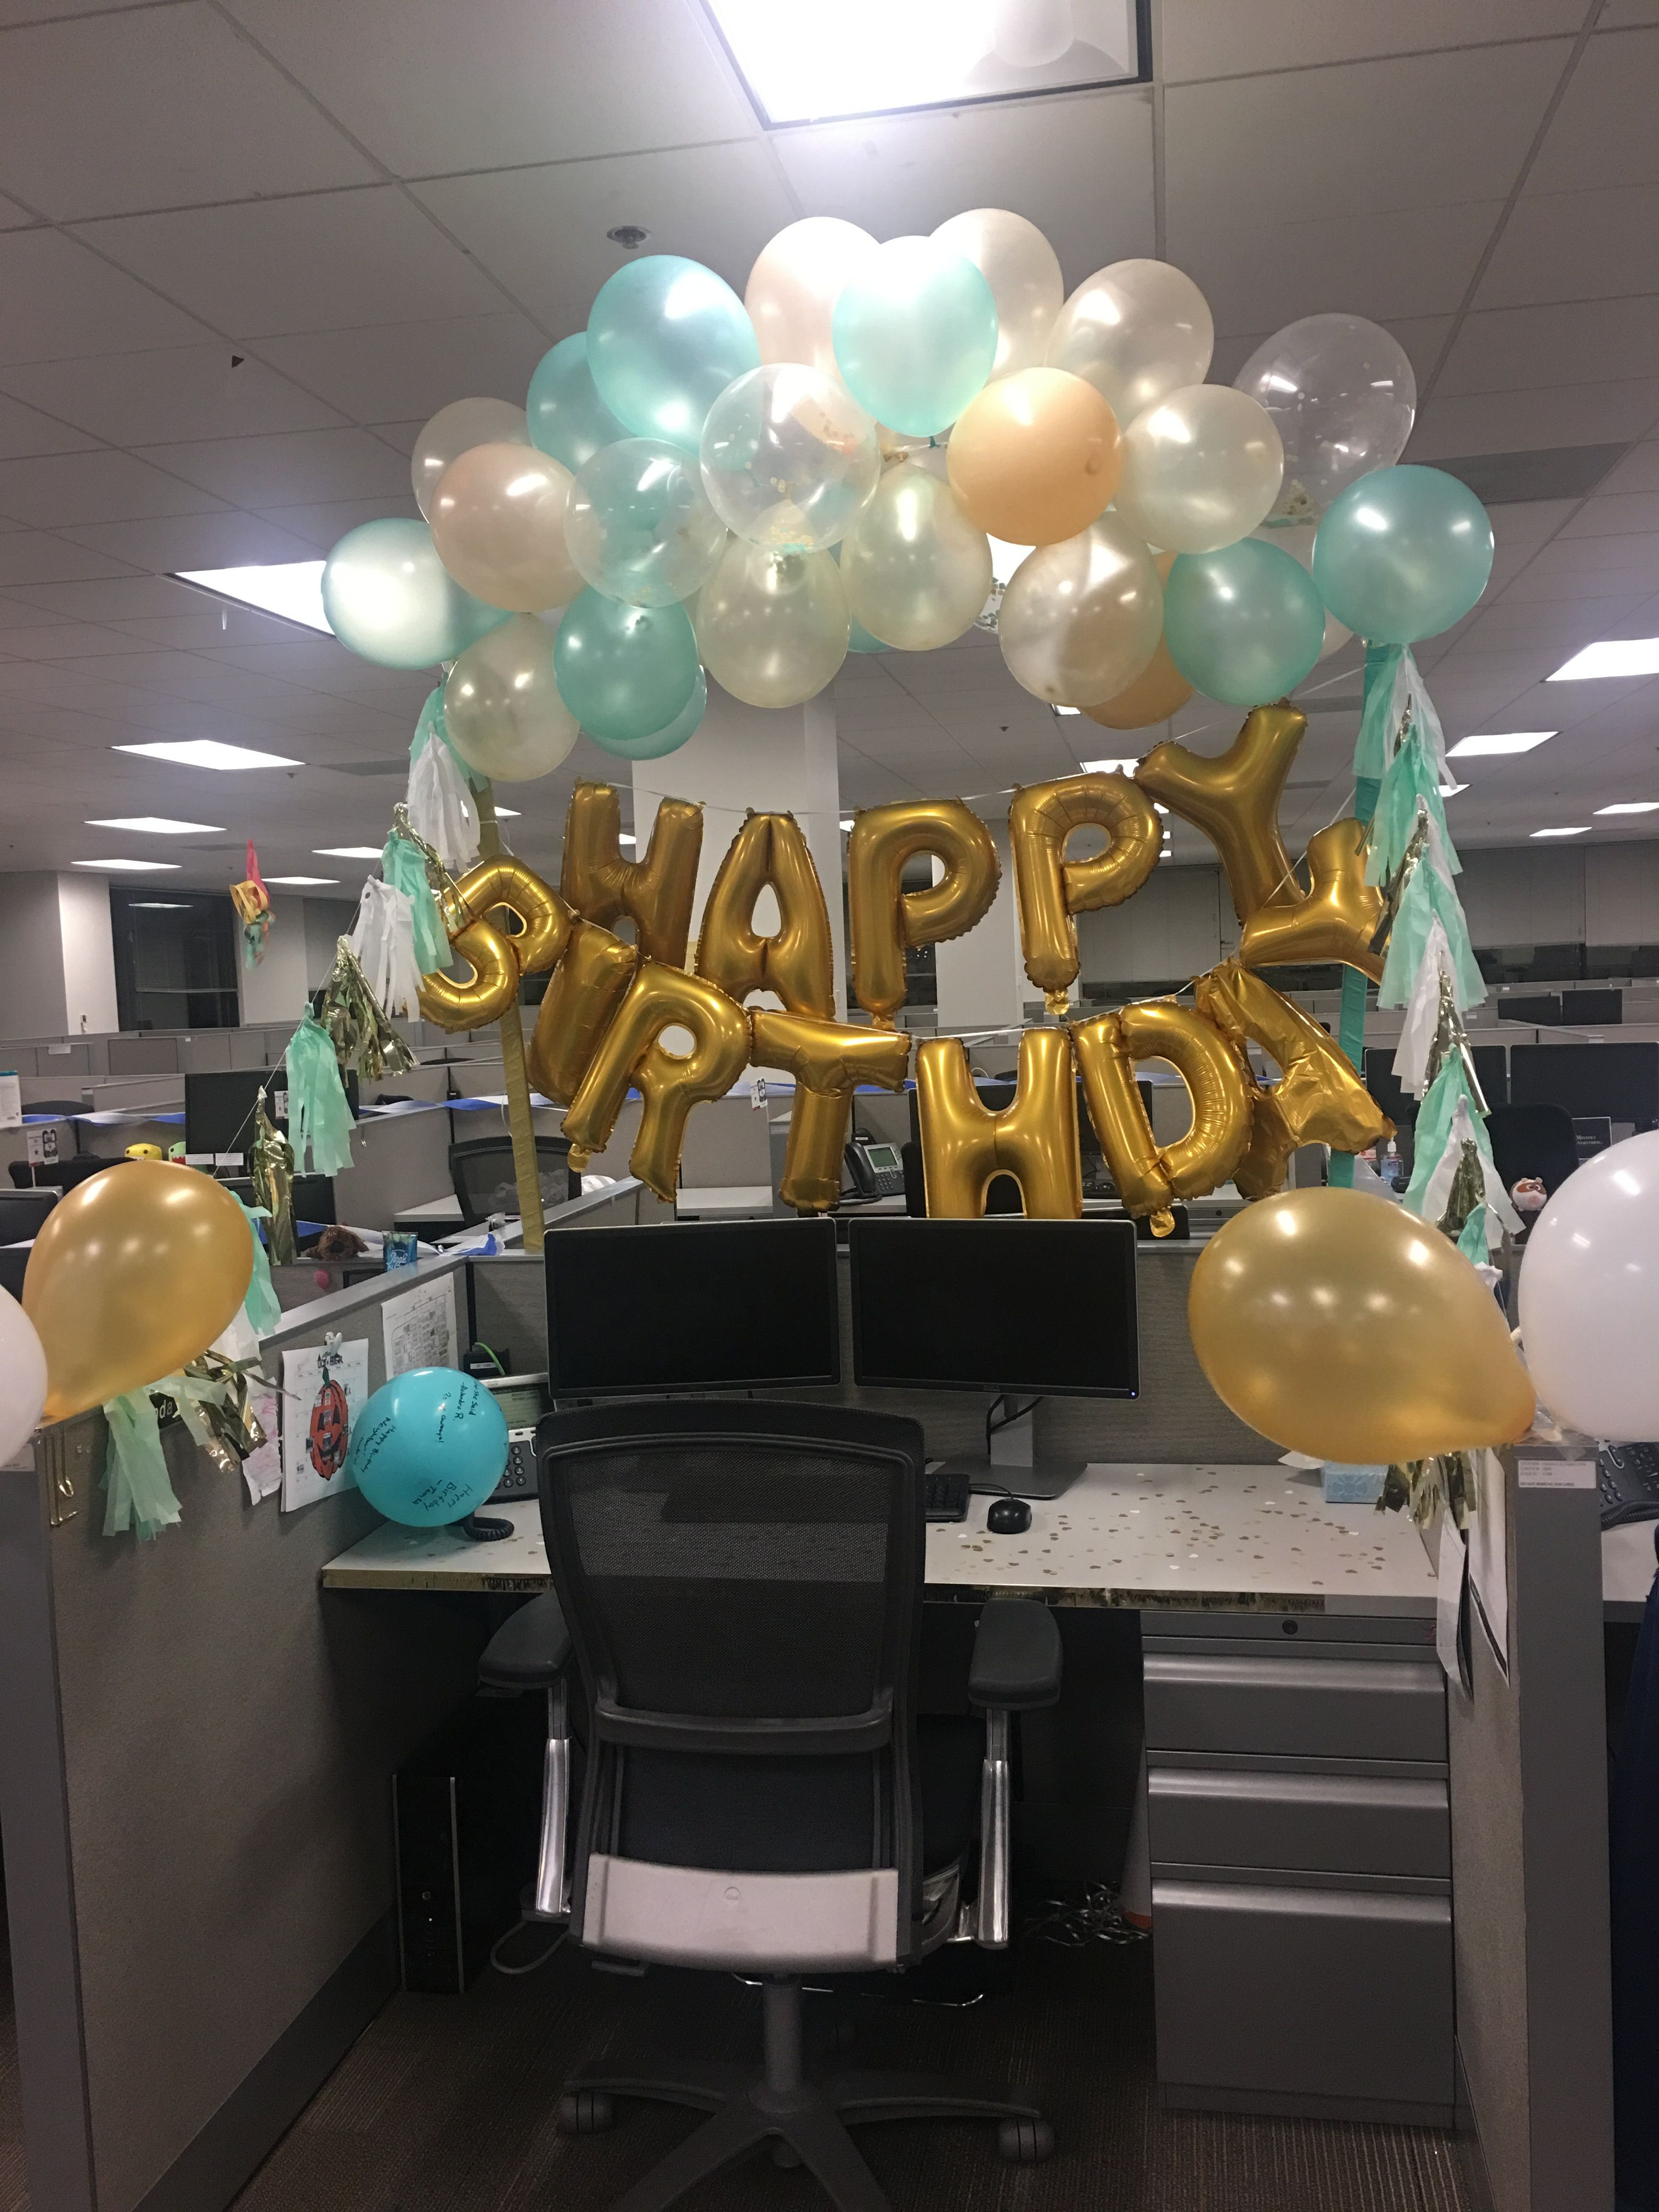 50Th Birthday Decoration Ideas For Office
 Mint green and gold desk birthday decorations